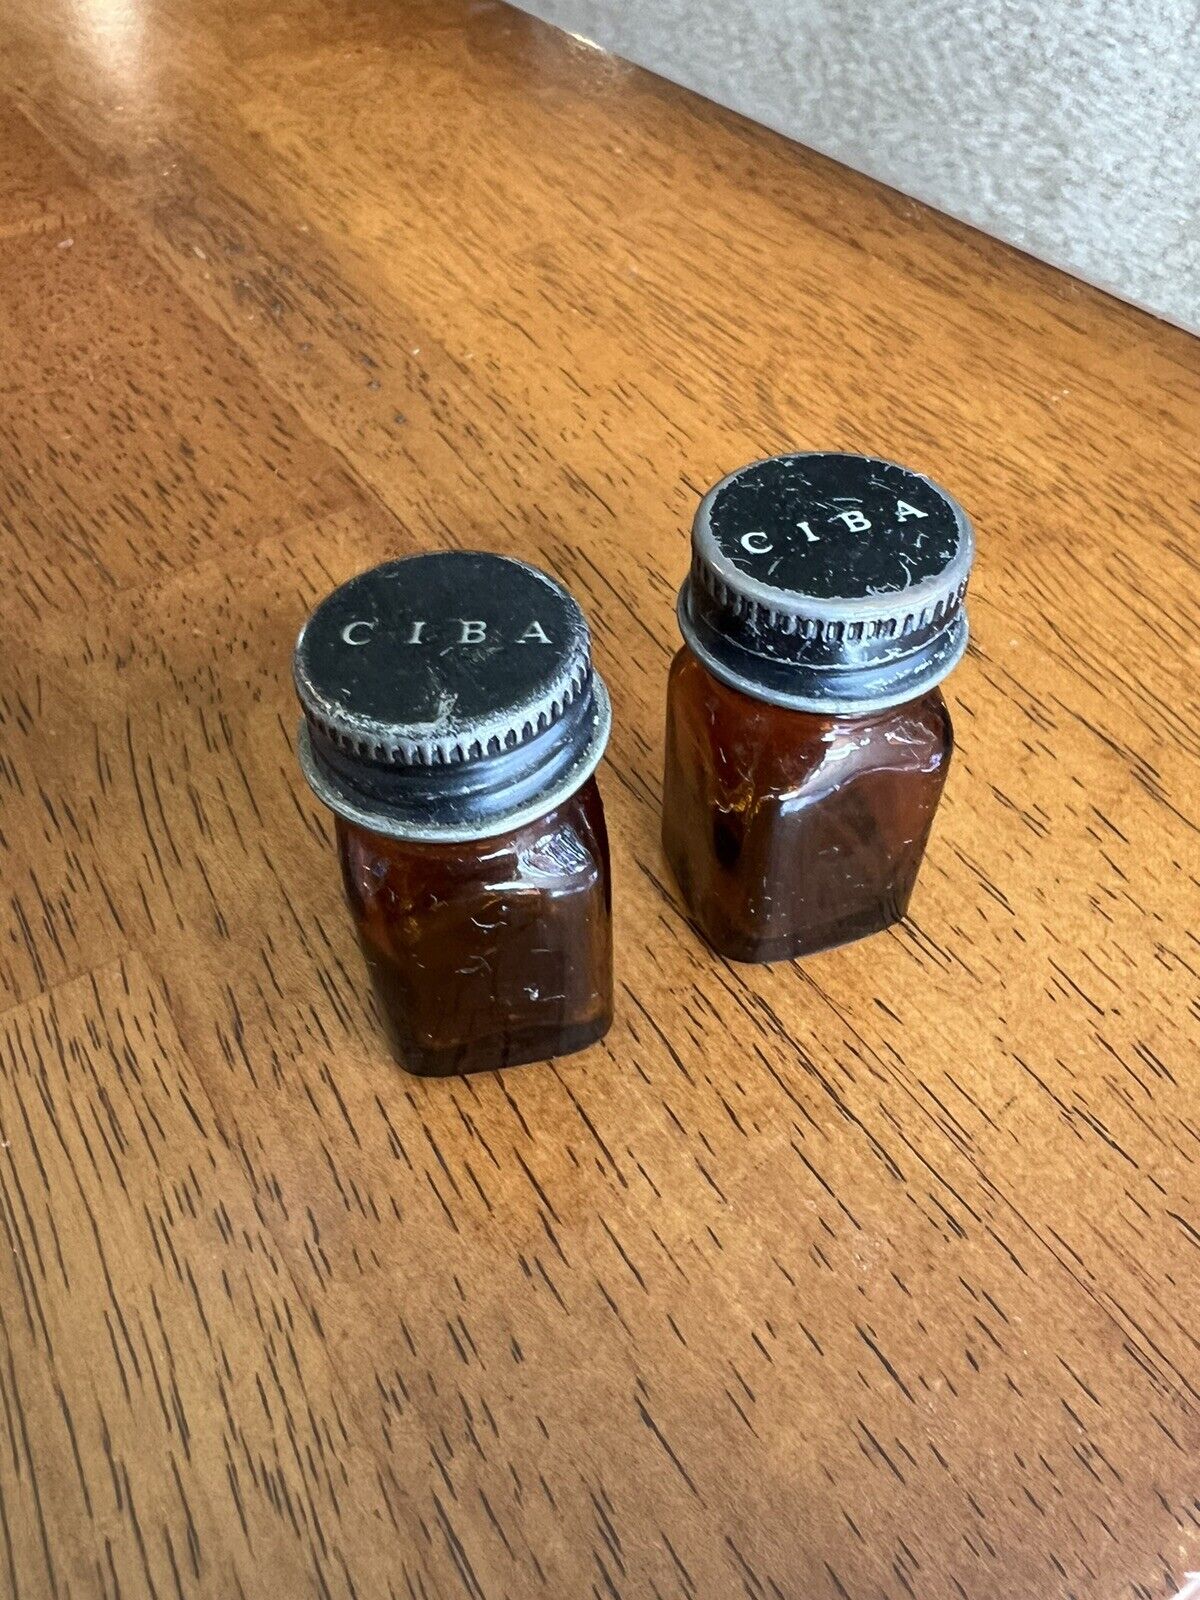 Two Small Vintage Amber Glass Bottle Ciba on Metal Top Medicine Apothocary Decor